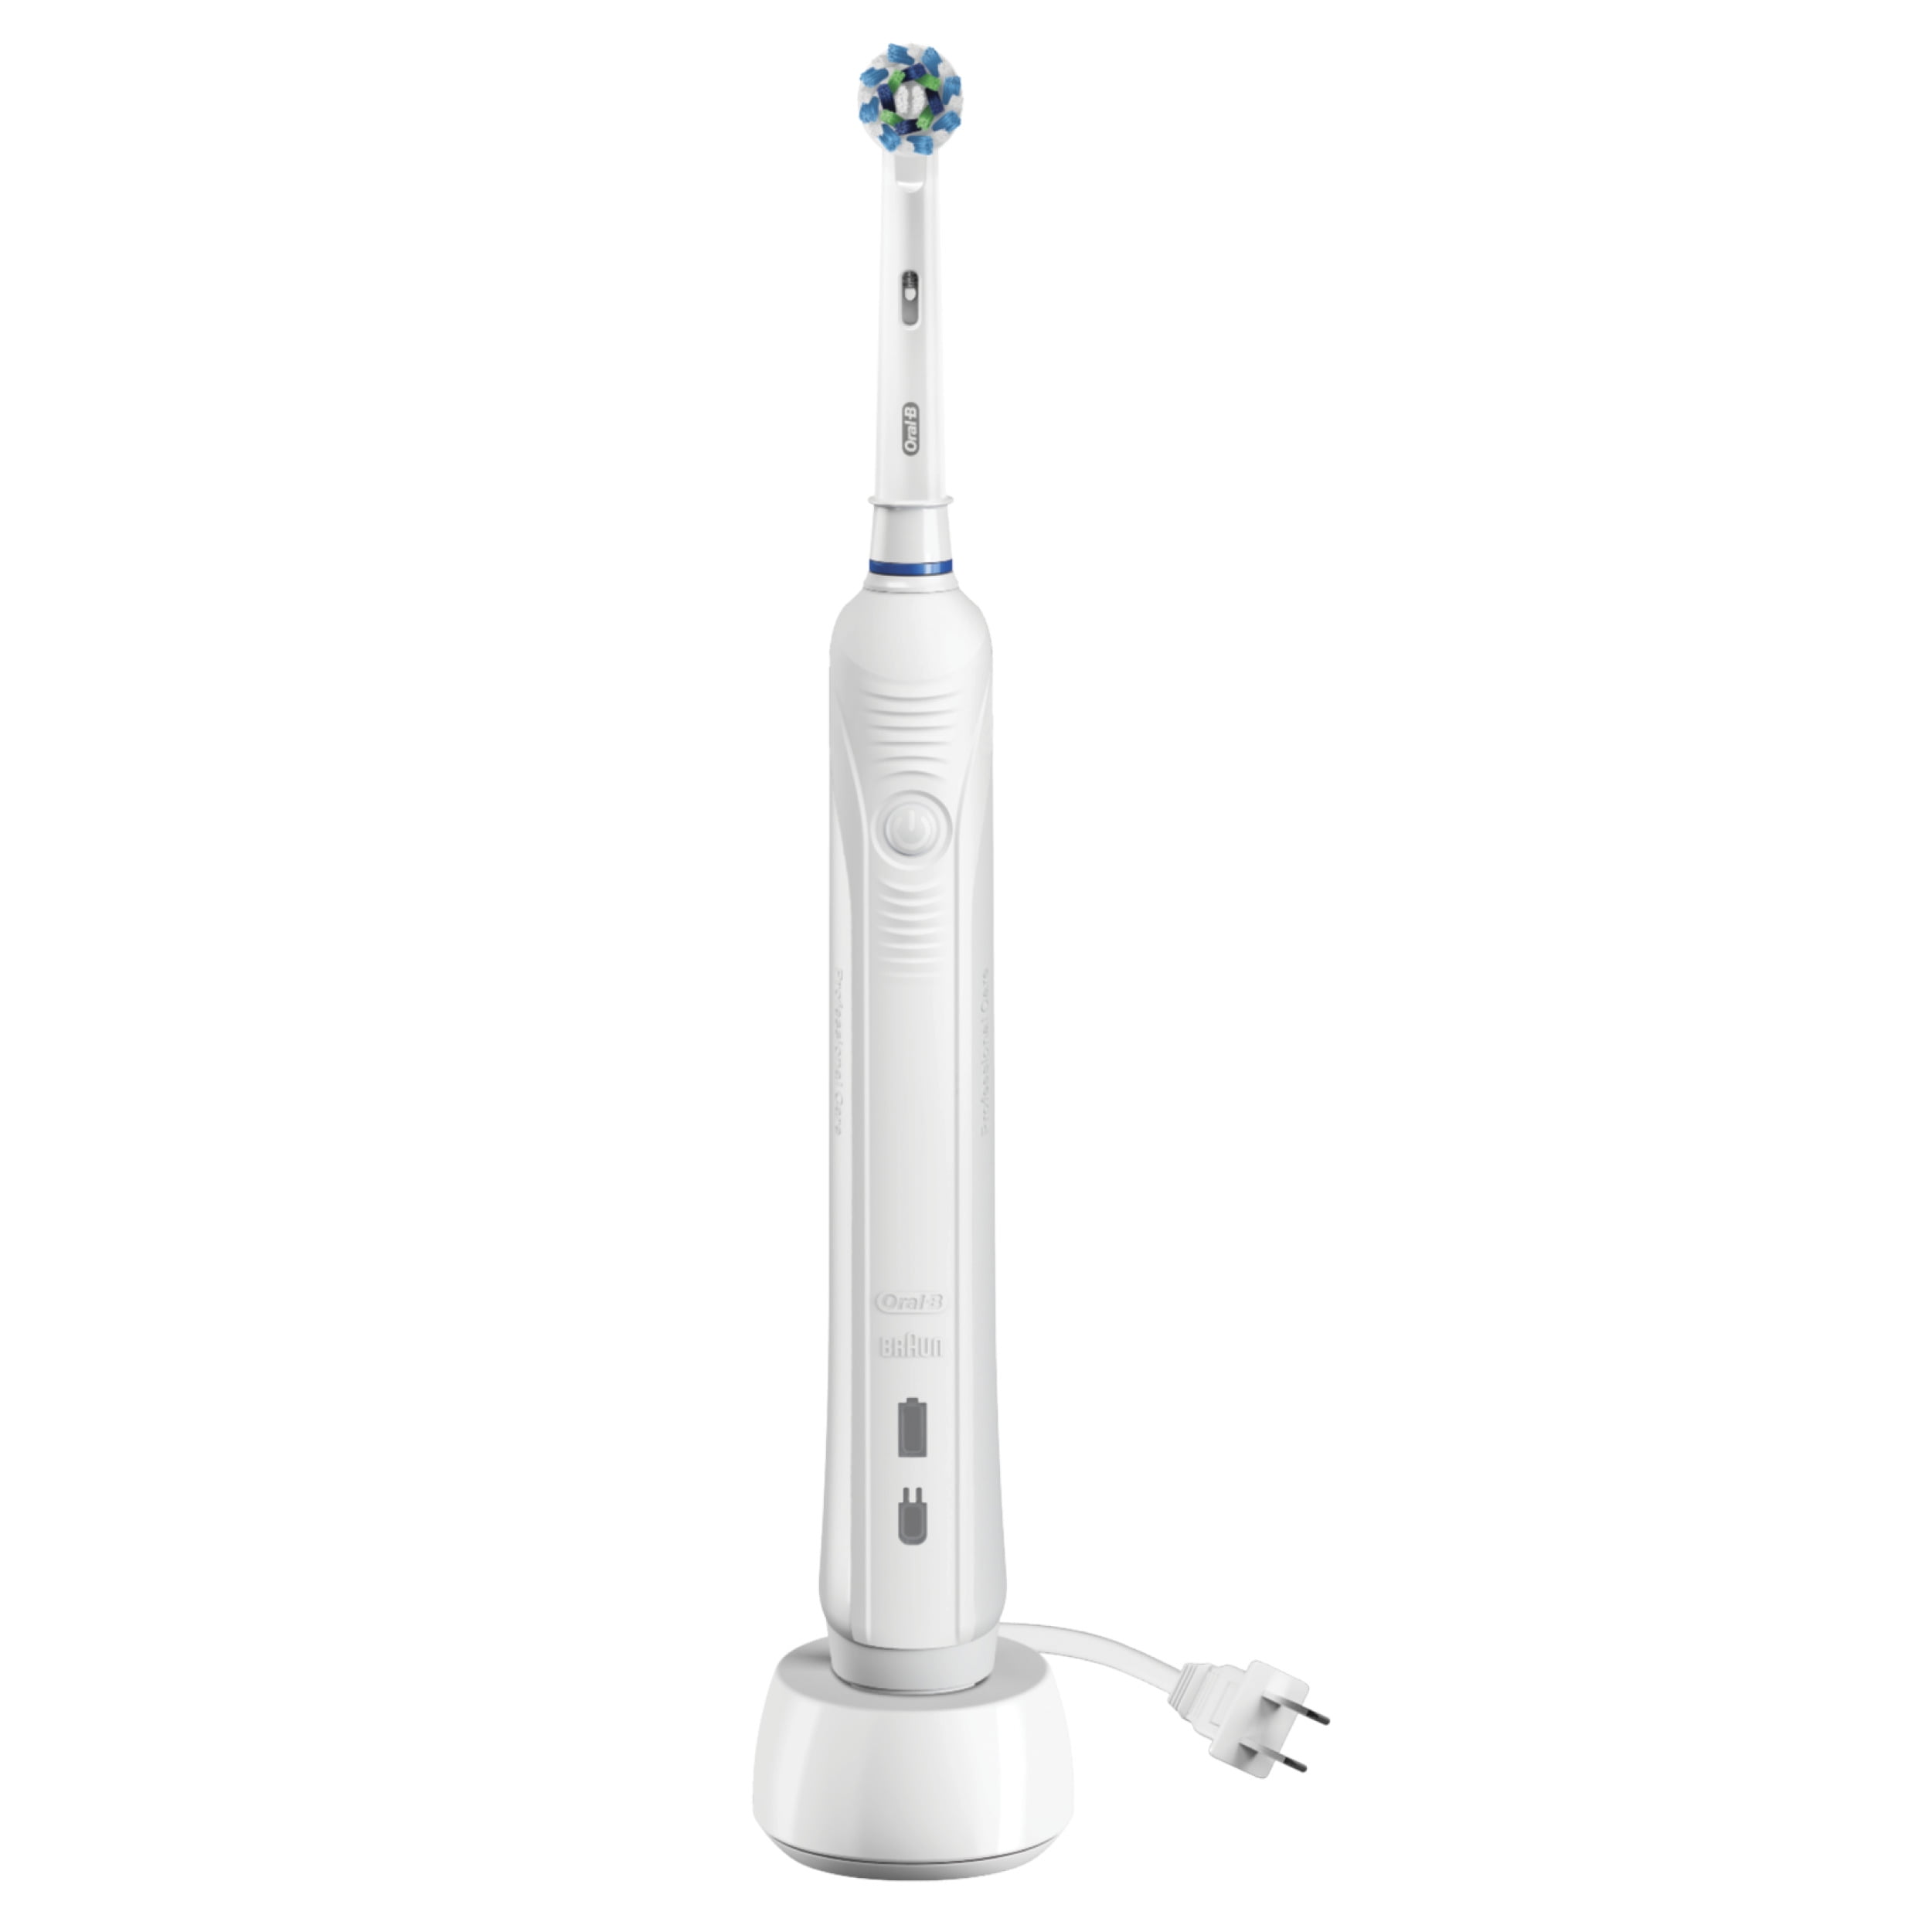 72 INFO ORAL B TOOTHBRUSH WITH VIDEO TUTORIAL Brush